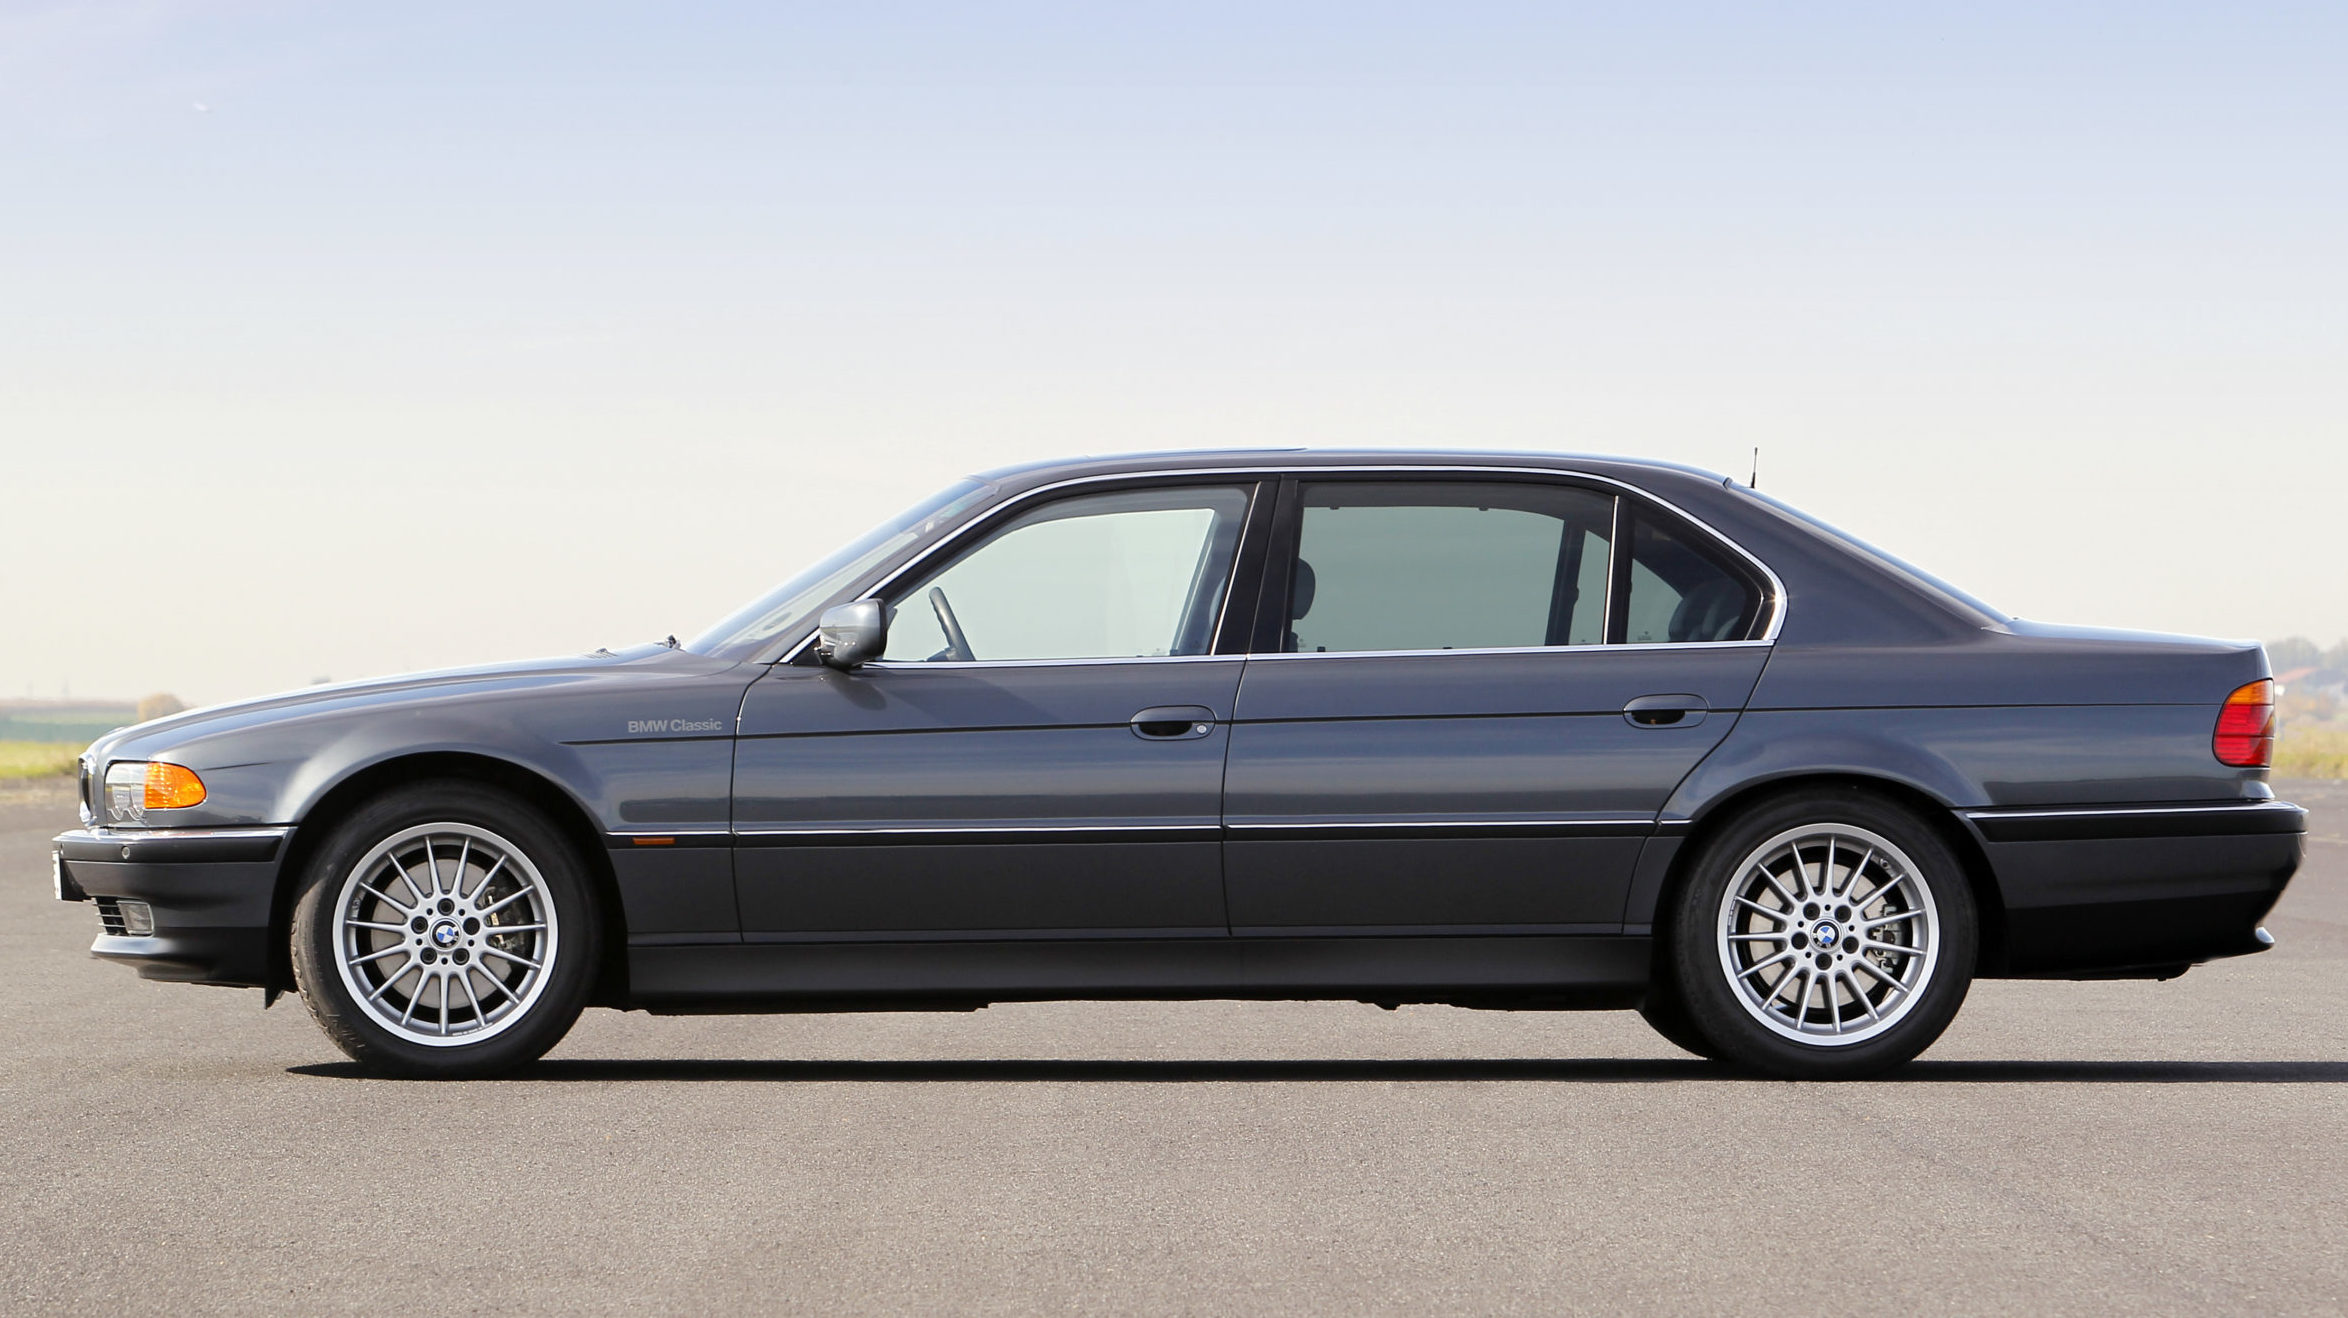 BMW Classic Shows Off The Best Of The E38 7 Series - BimmerLife